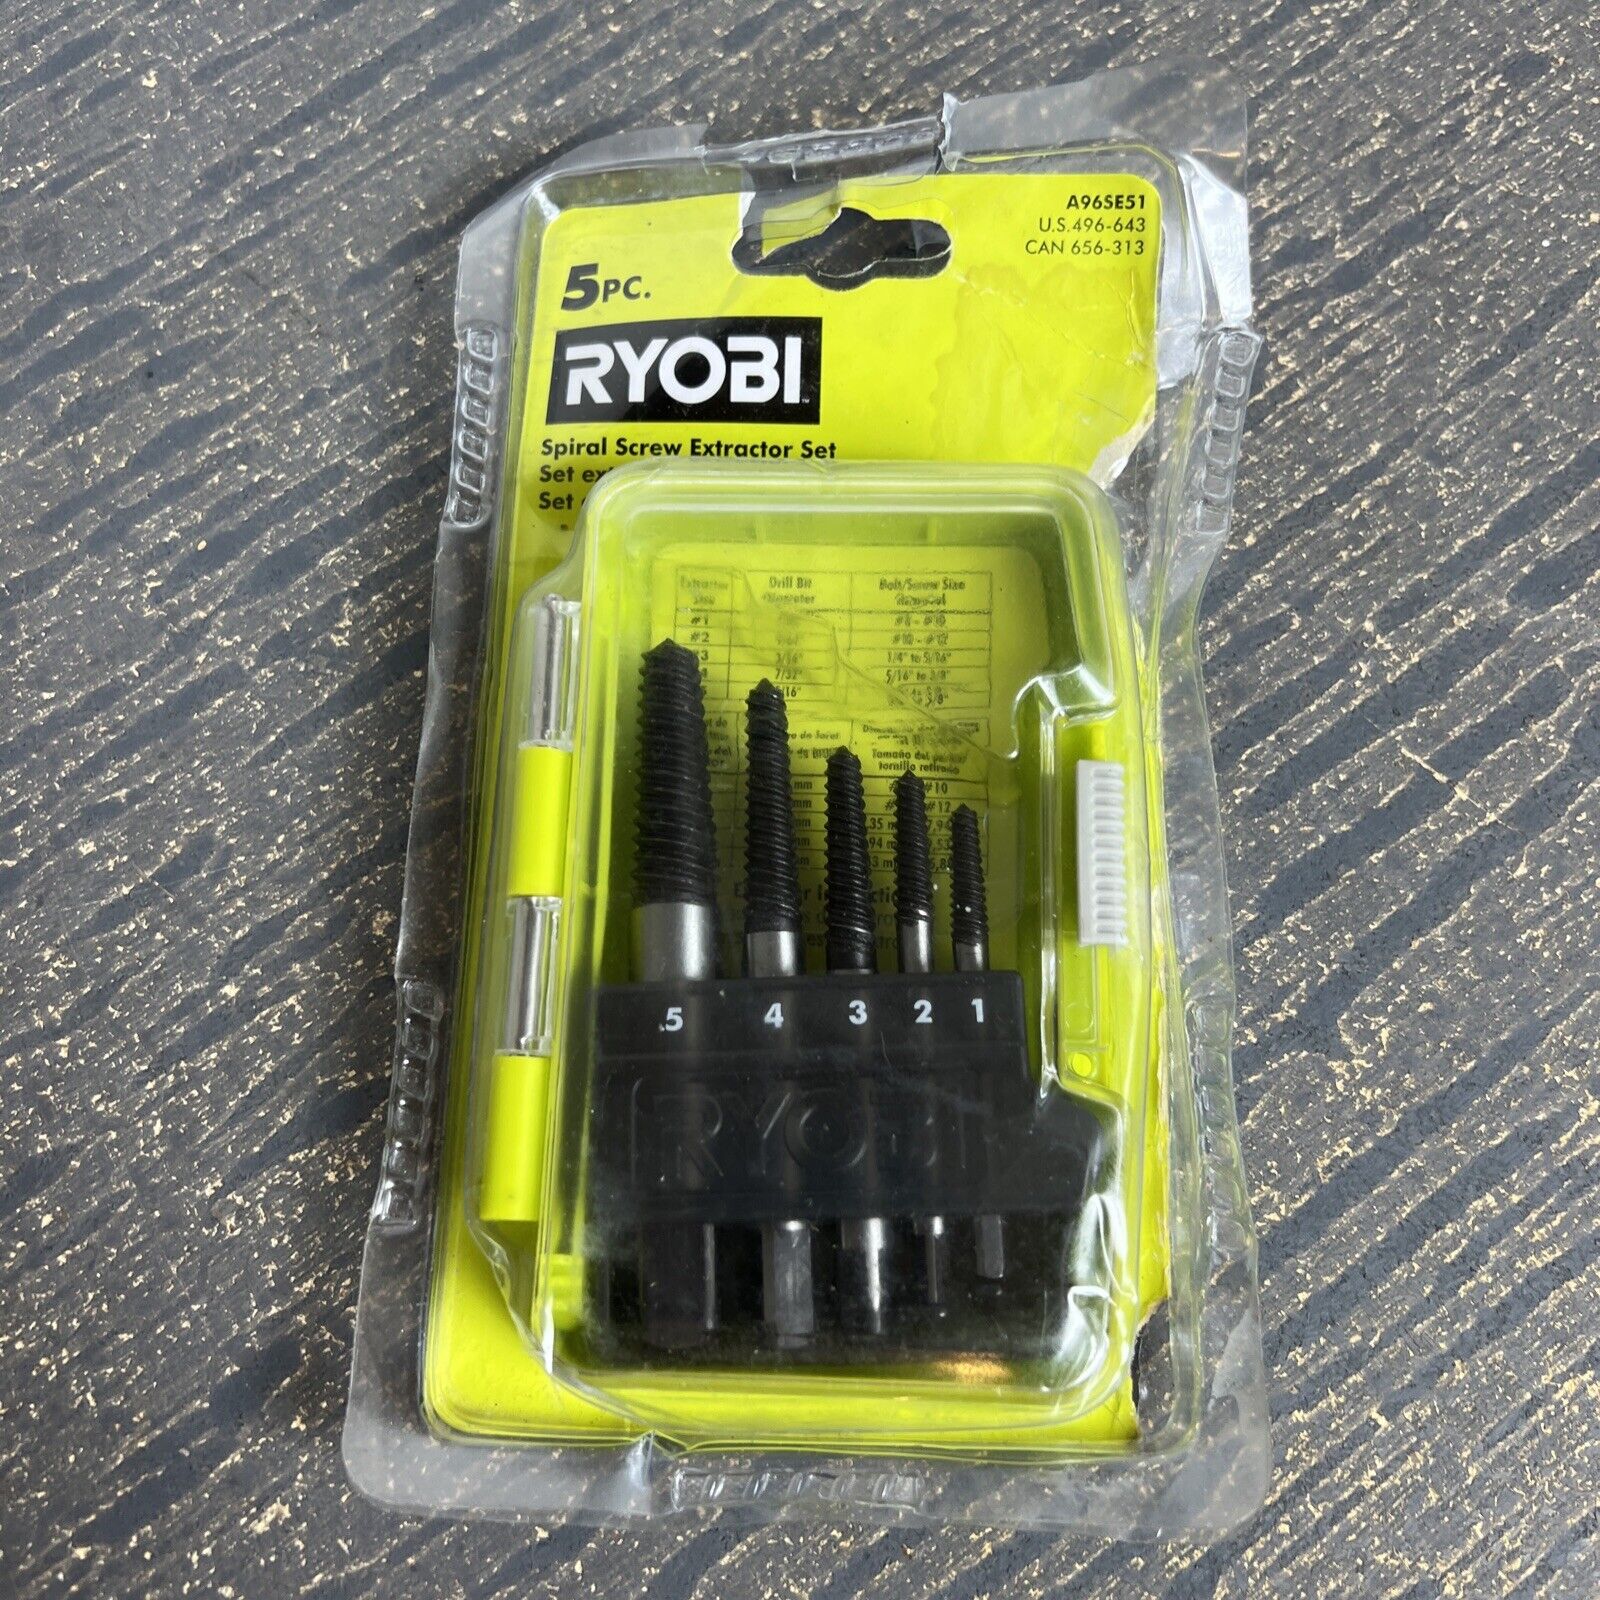 How To Use Ryobi Spiral Screw Extractor